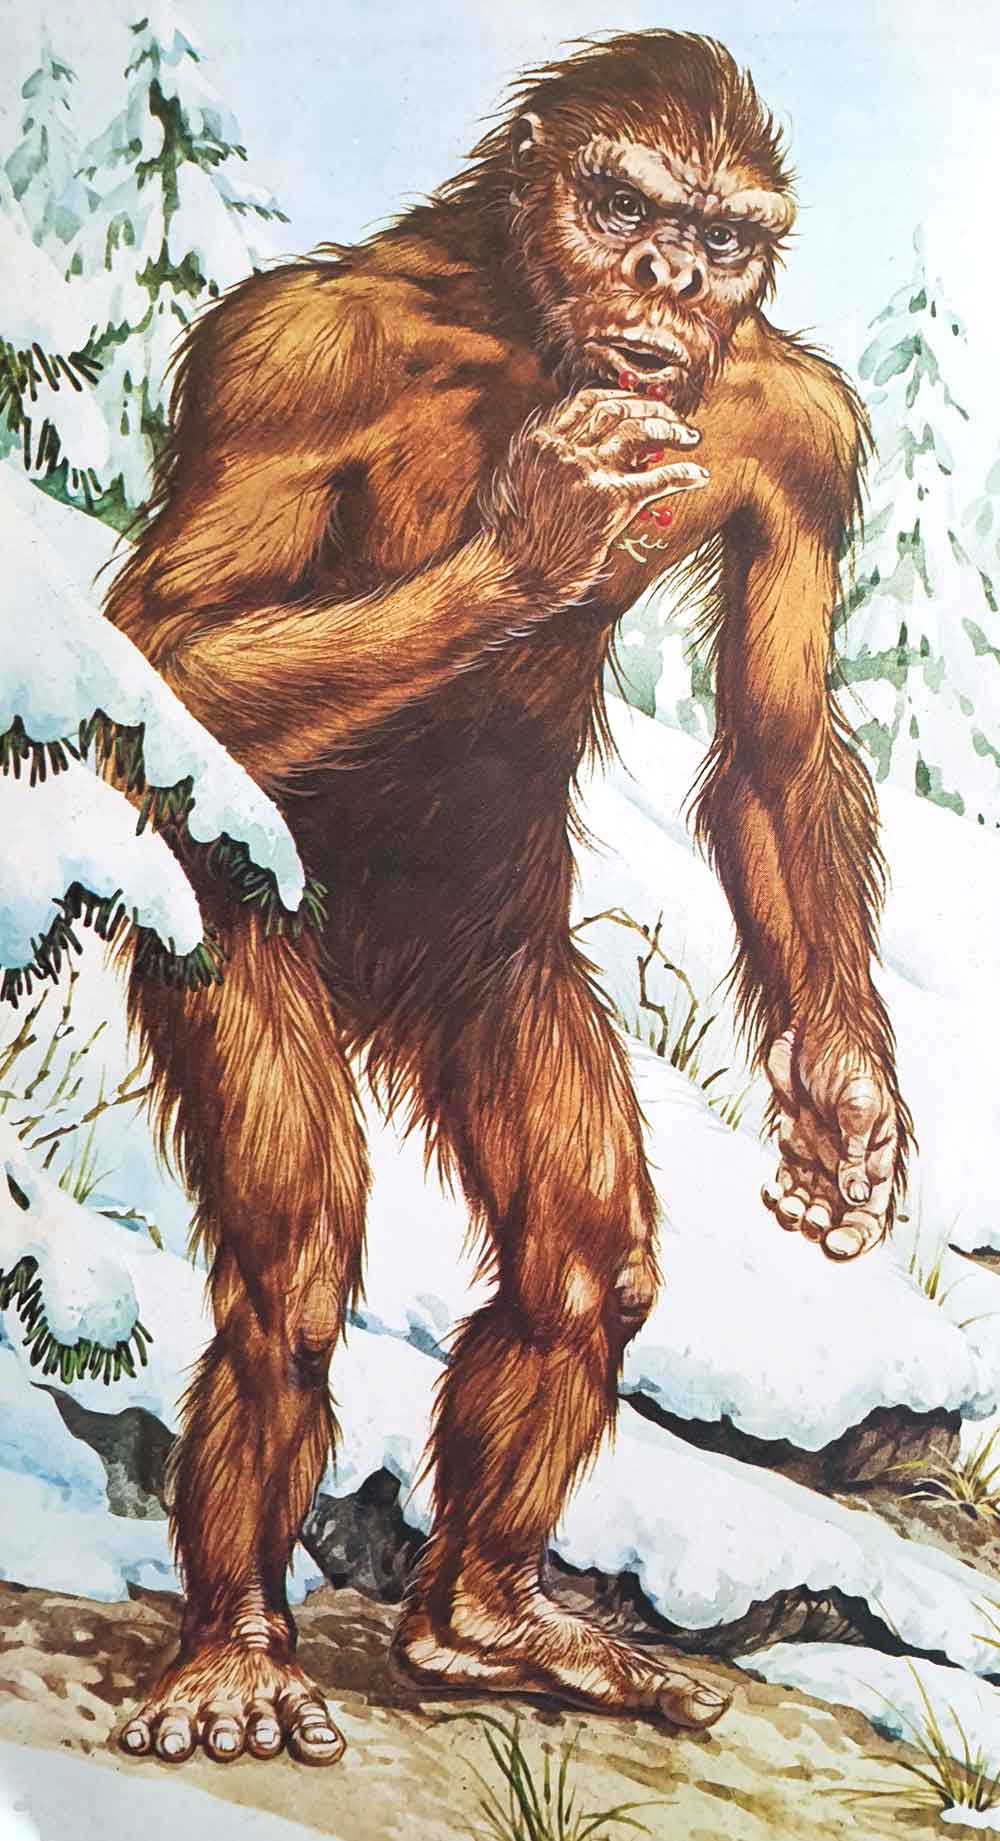 eDNA, Footprints and the Biological Bigfoot: Comments on an